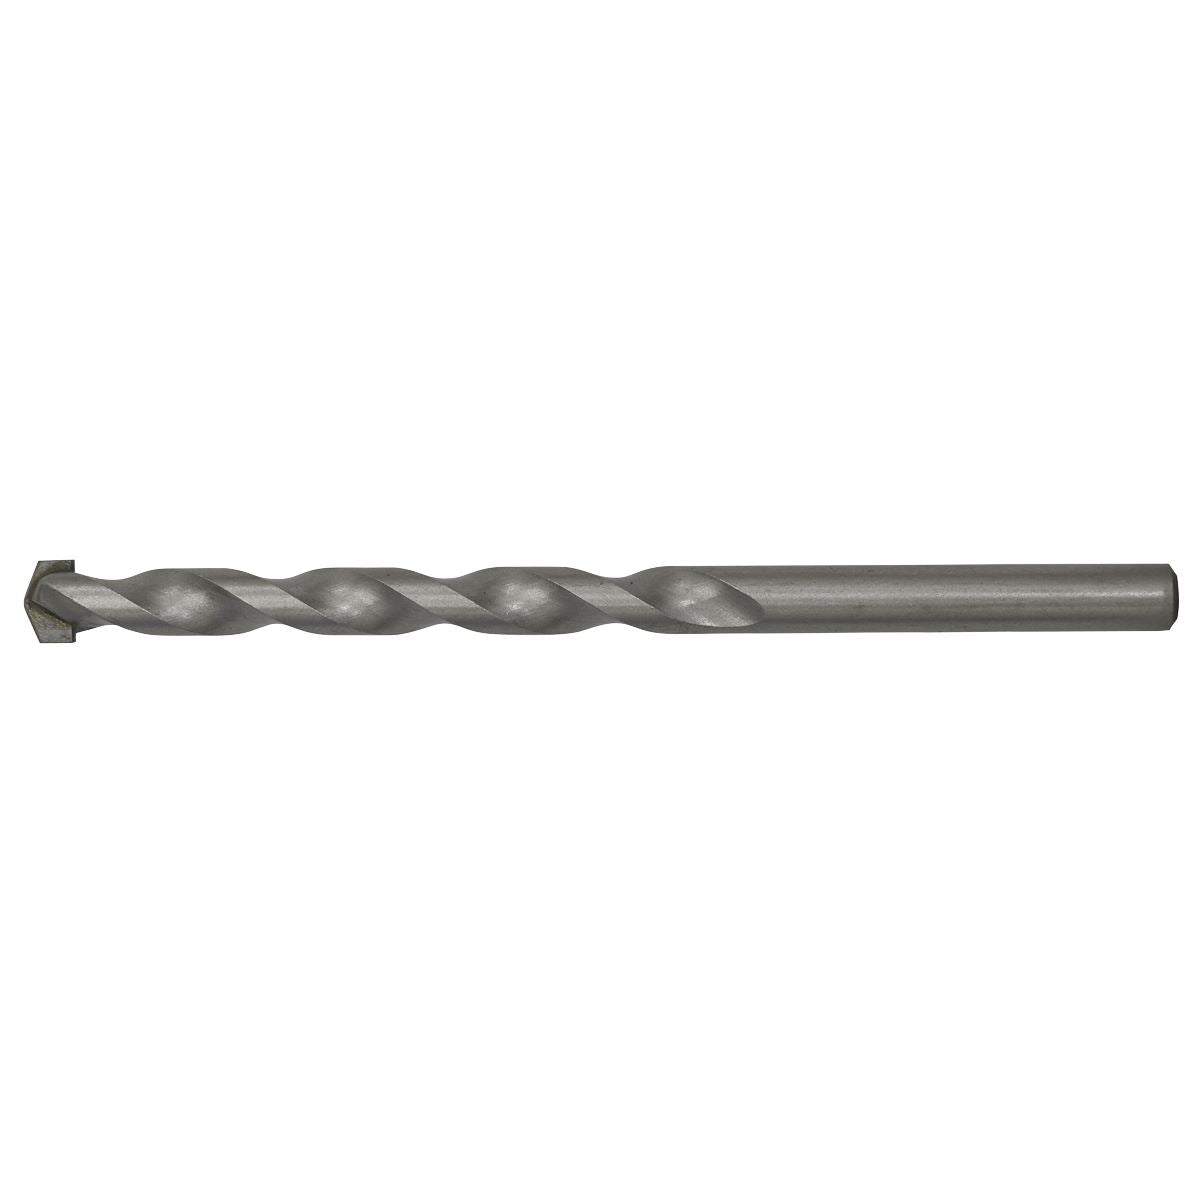 Worksafe by Sealey Straight Shank Rotary Impact Drill Bit Ø11 x 150mm